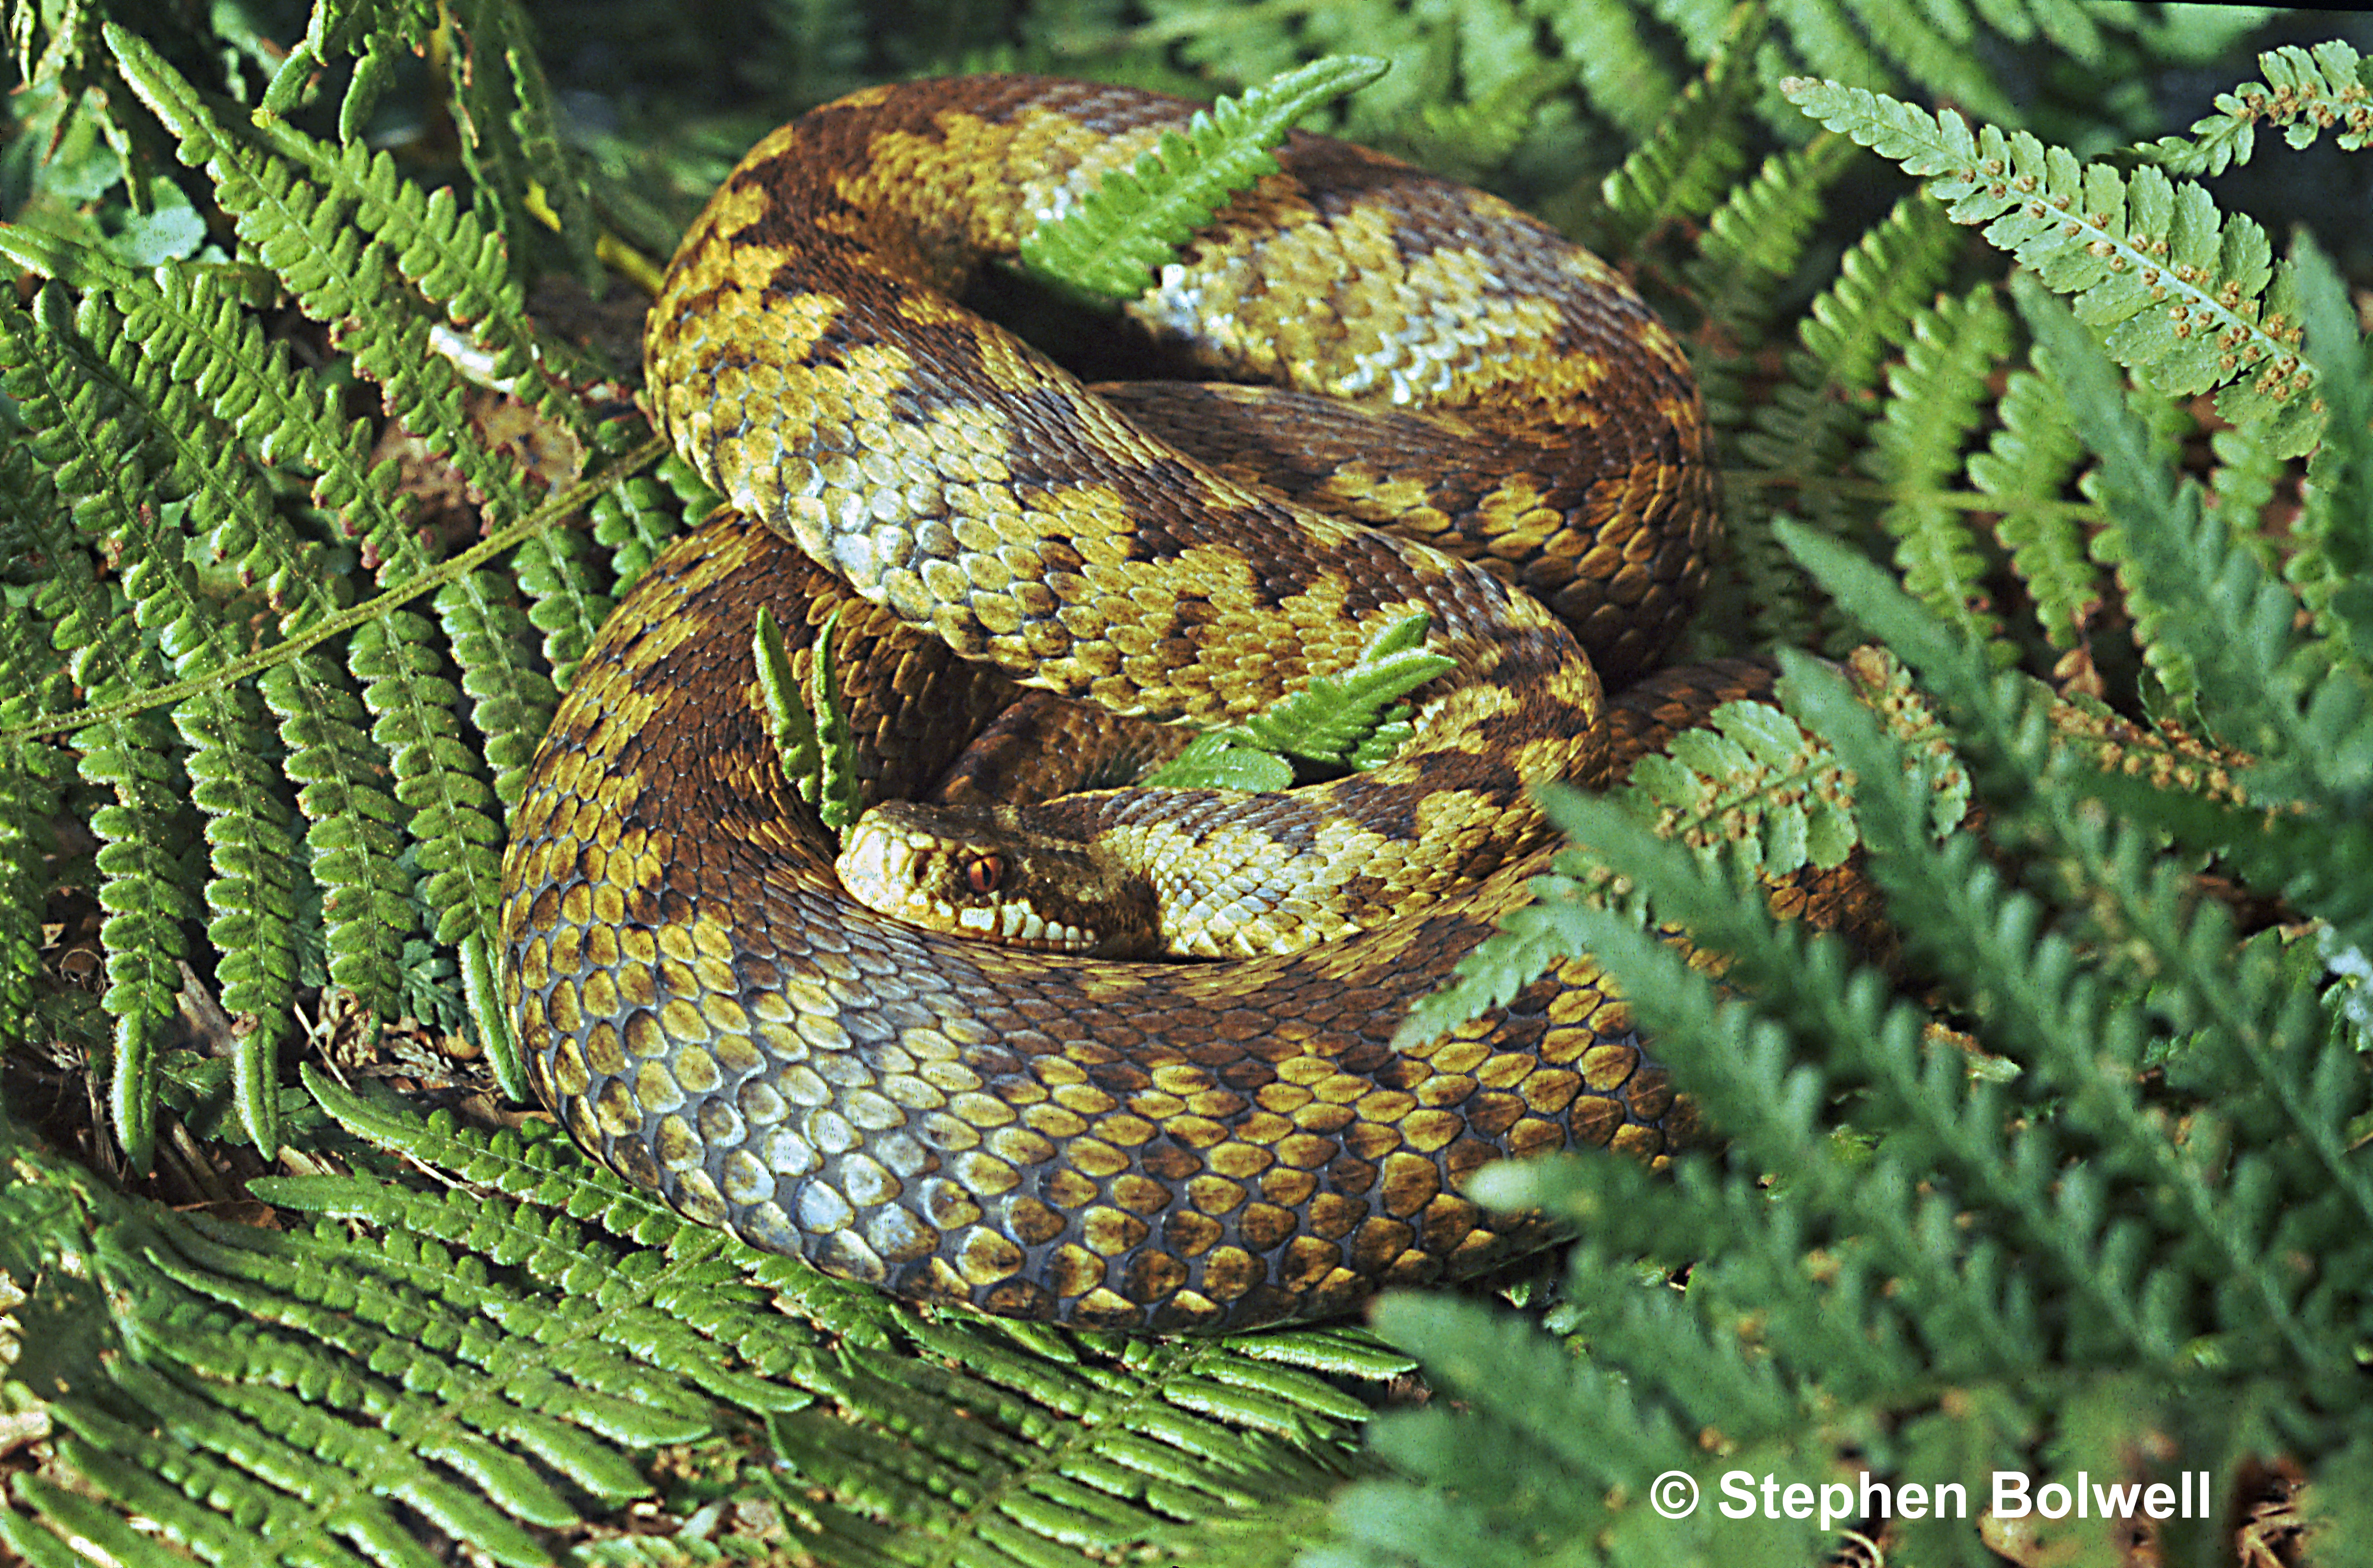  Reptiles aren't everybodies idea of agreeable, but how is that possible? This female adder is perfection. How is t possible not to befor me most are very beautiful - in is case a female adder is a perfect example. How is it possible to be anything other than enchanted?